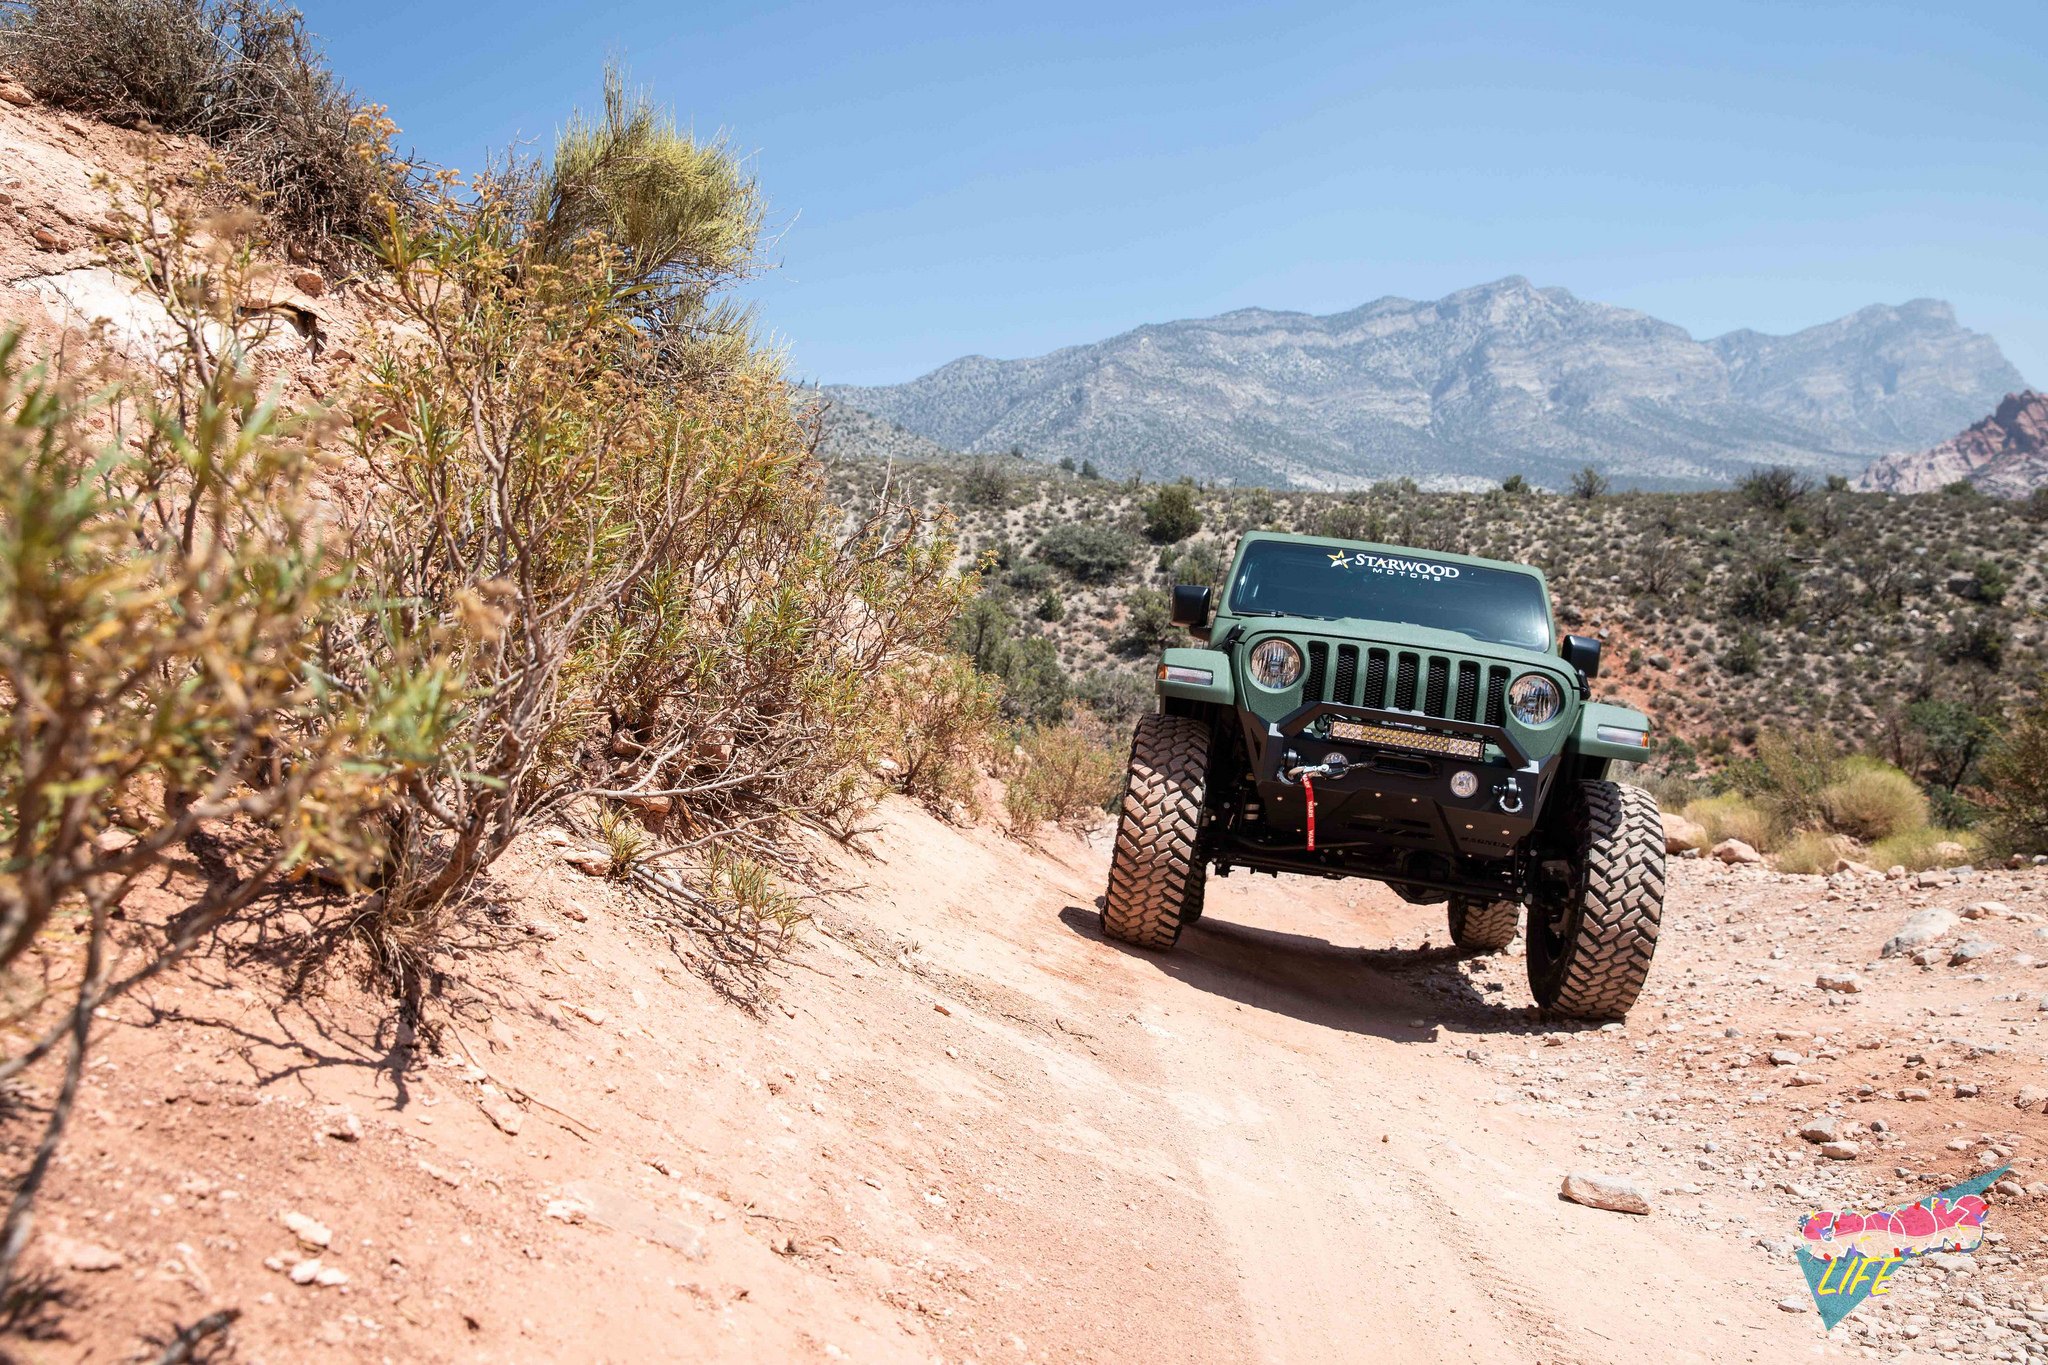 Green Jeep Wrangler with Off-road LED Light Bar - Photo by Jimmy Crook